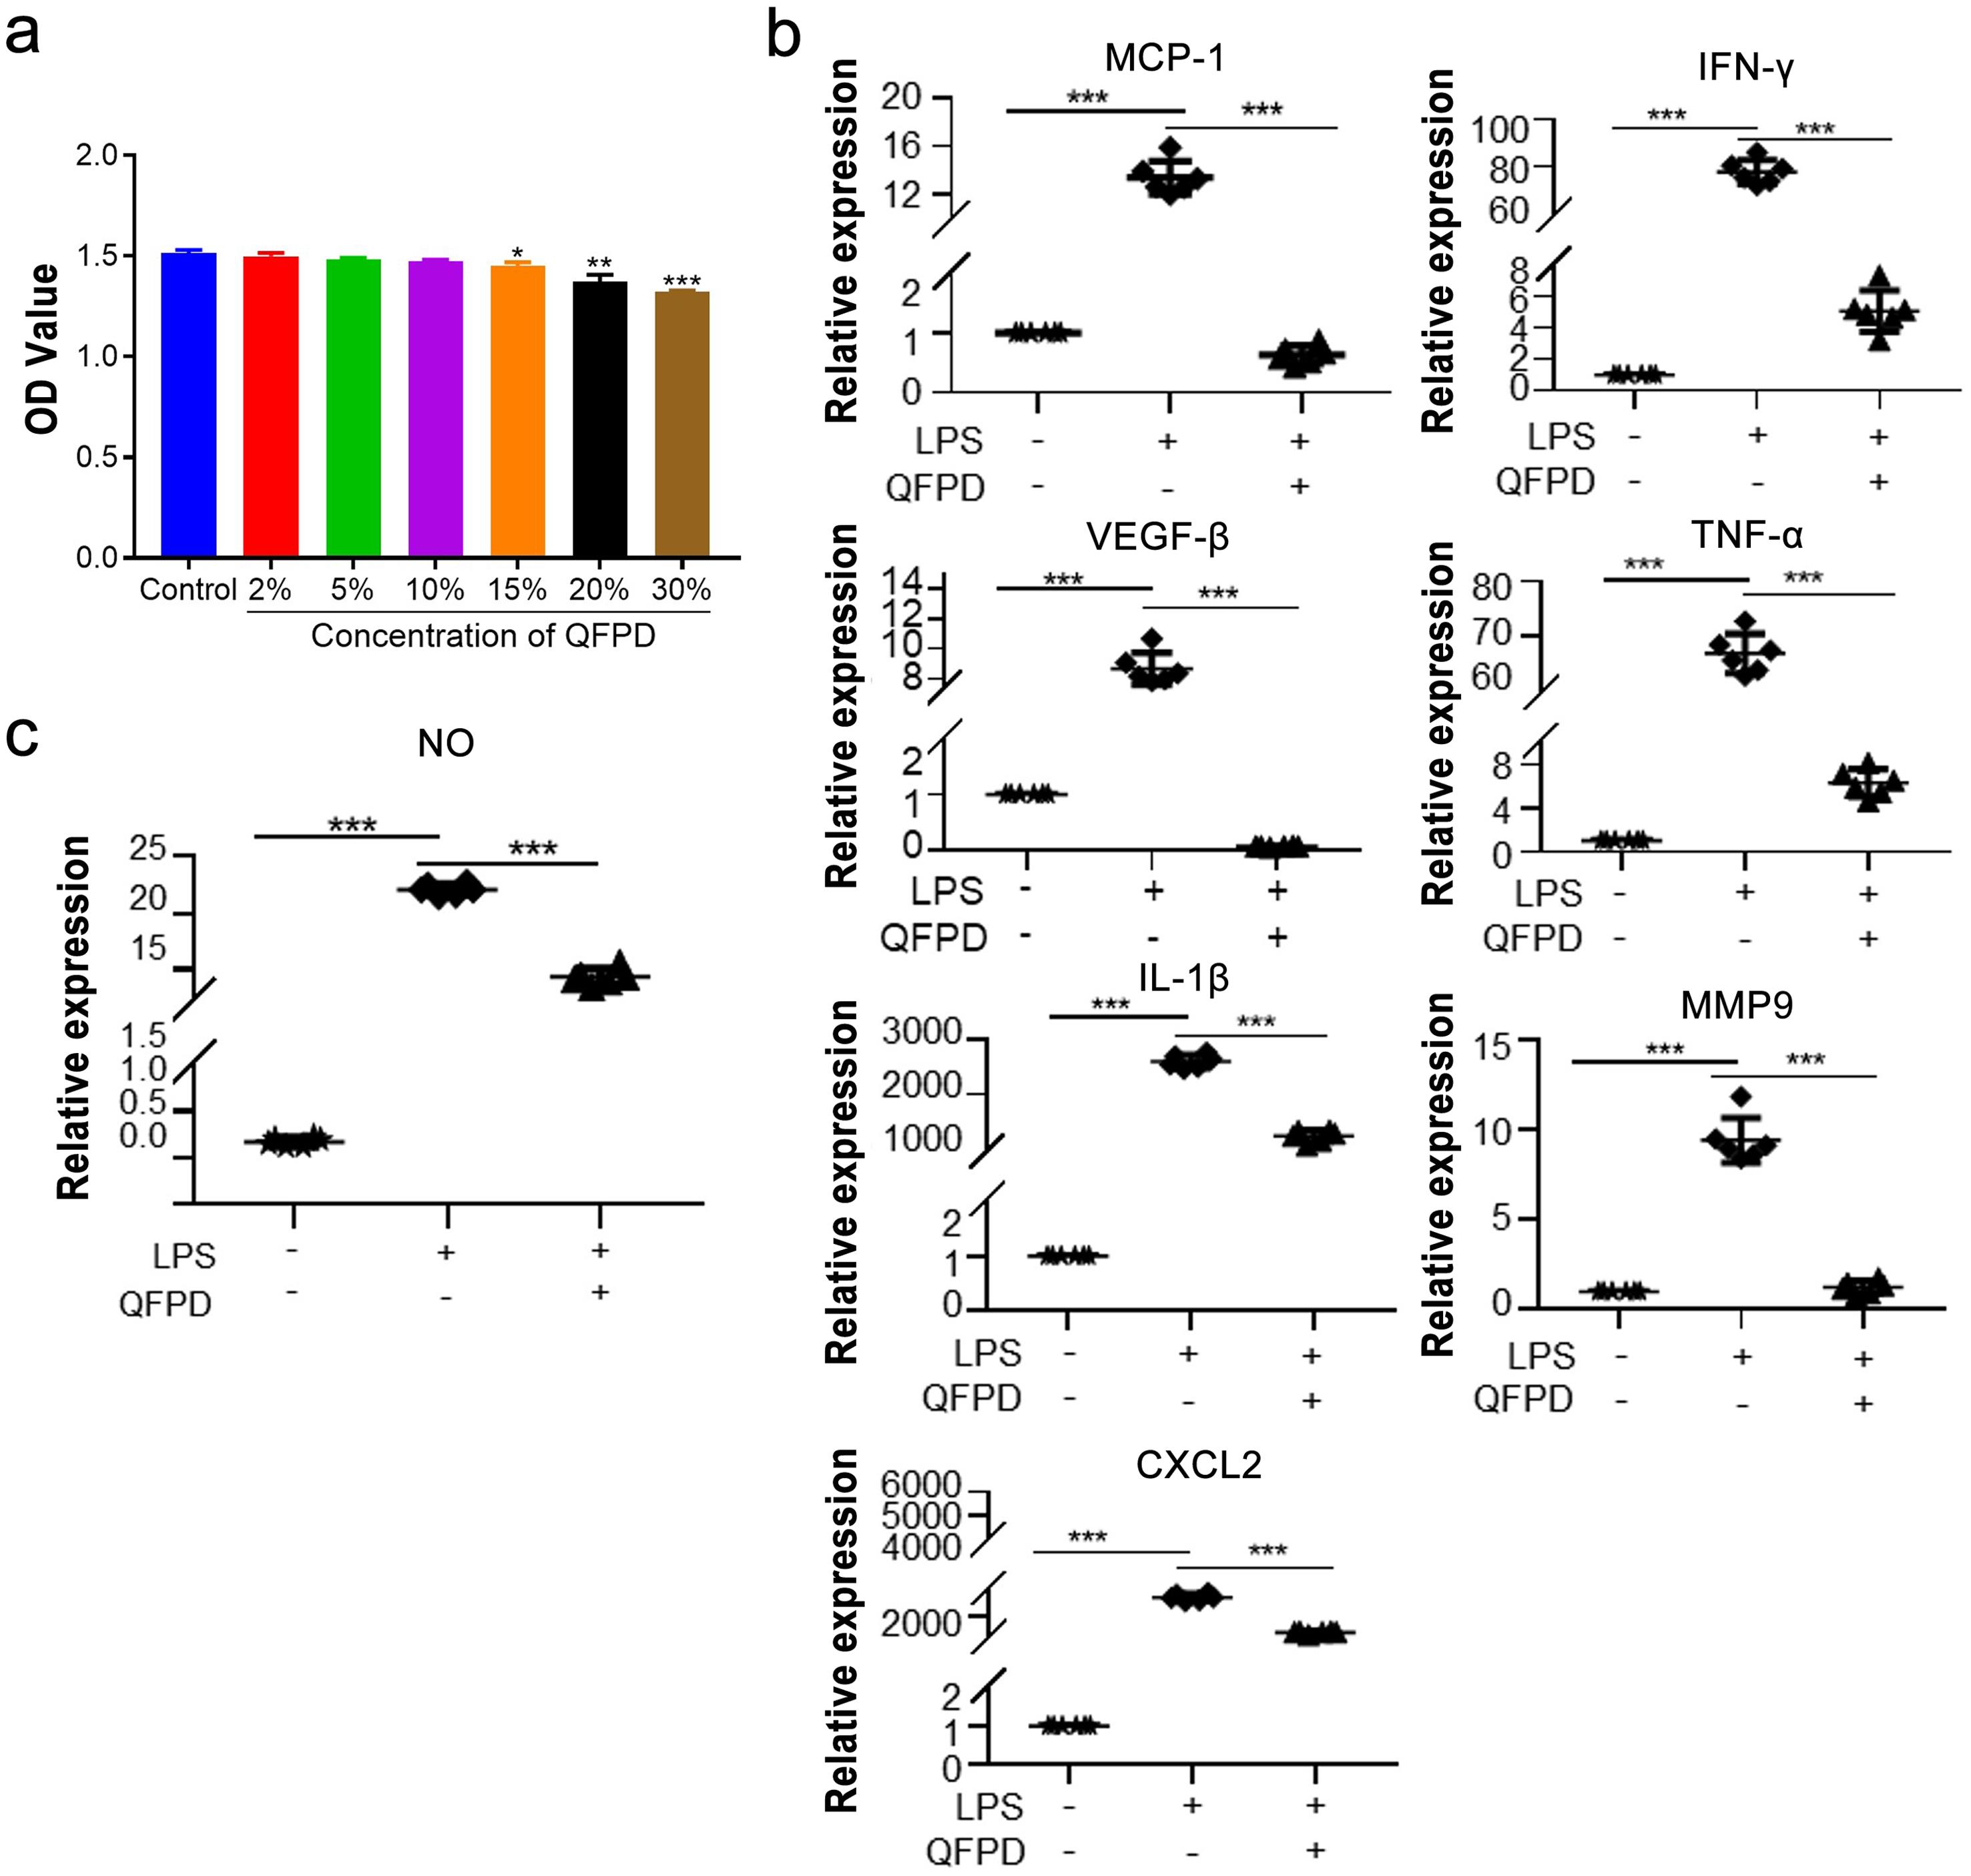 QFPD inhibits the inflammatory response in LPS-induced macrophages <italic>in vitro</italic>.